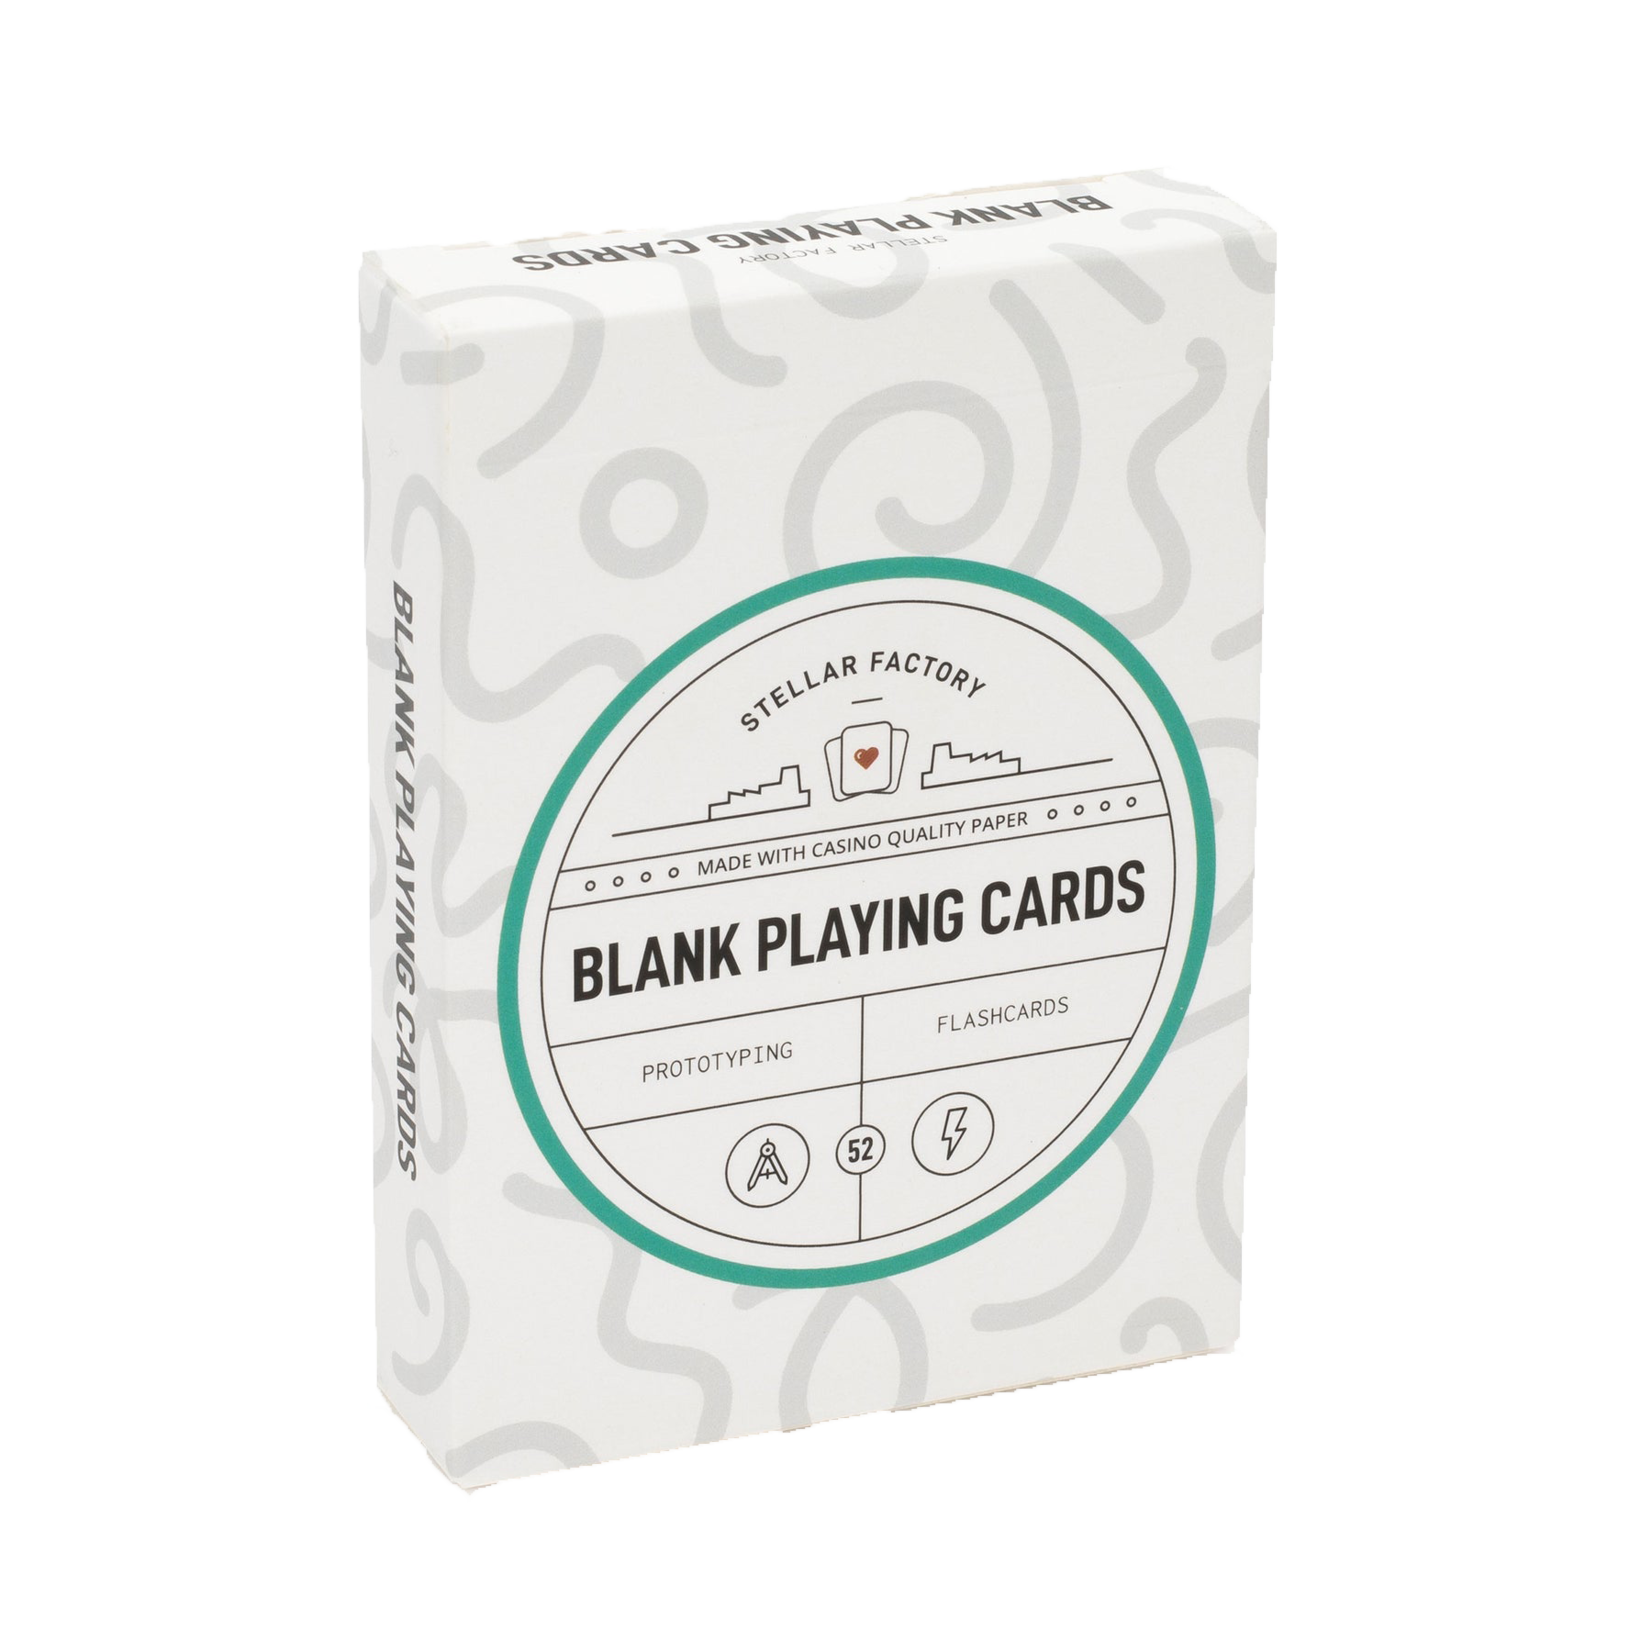 Cards: Blank Playing Cards